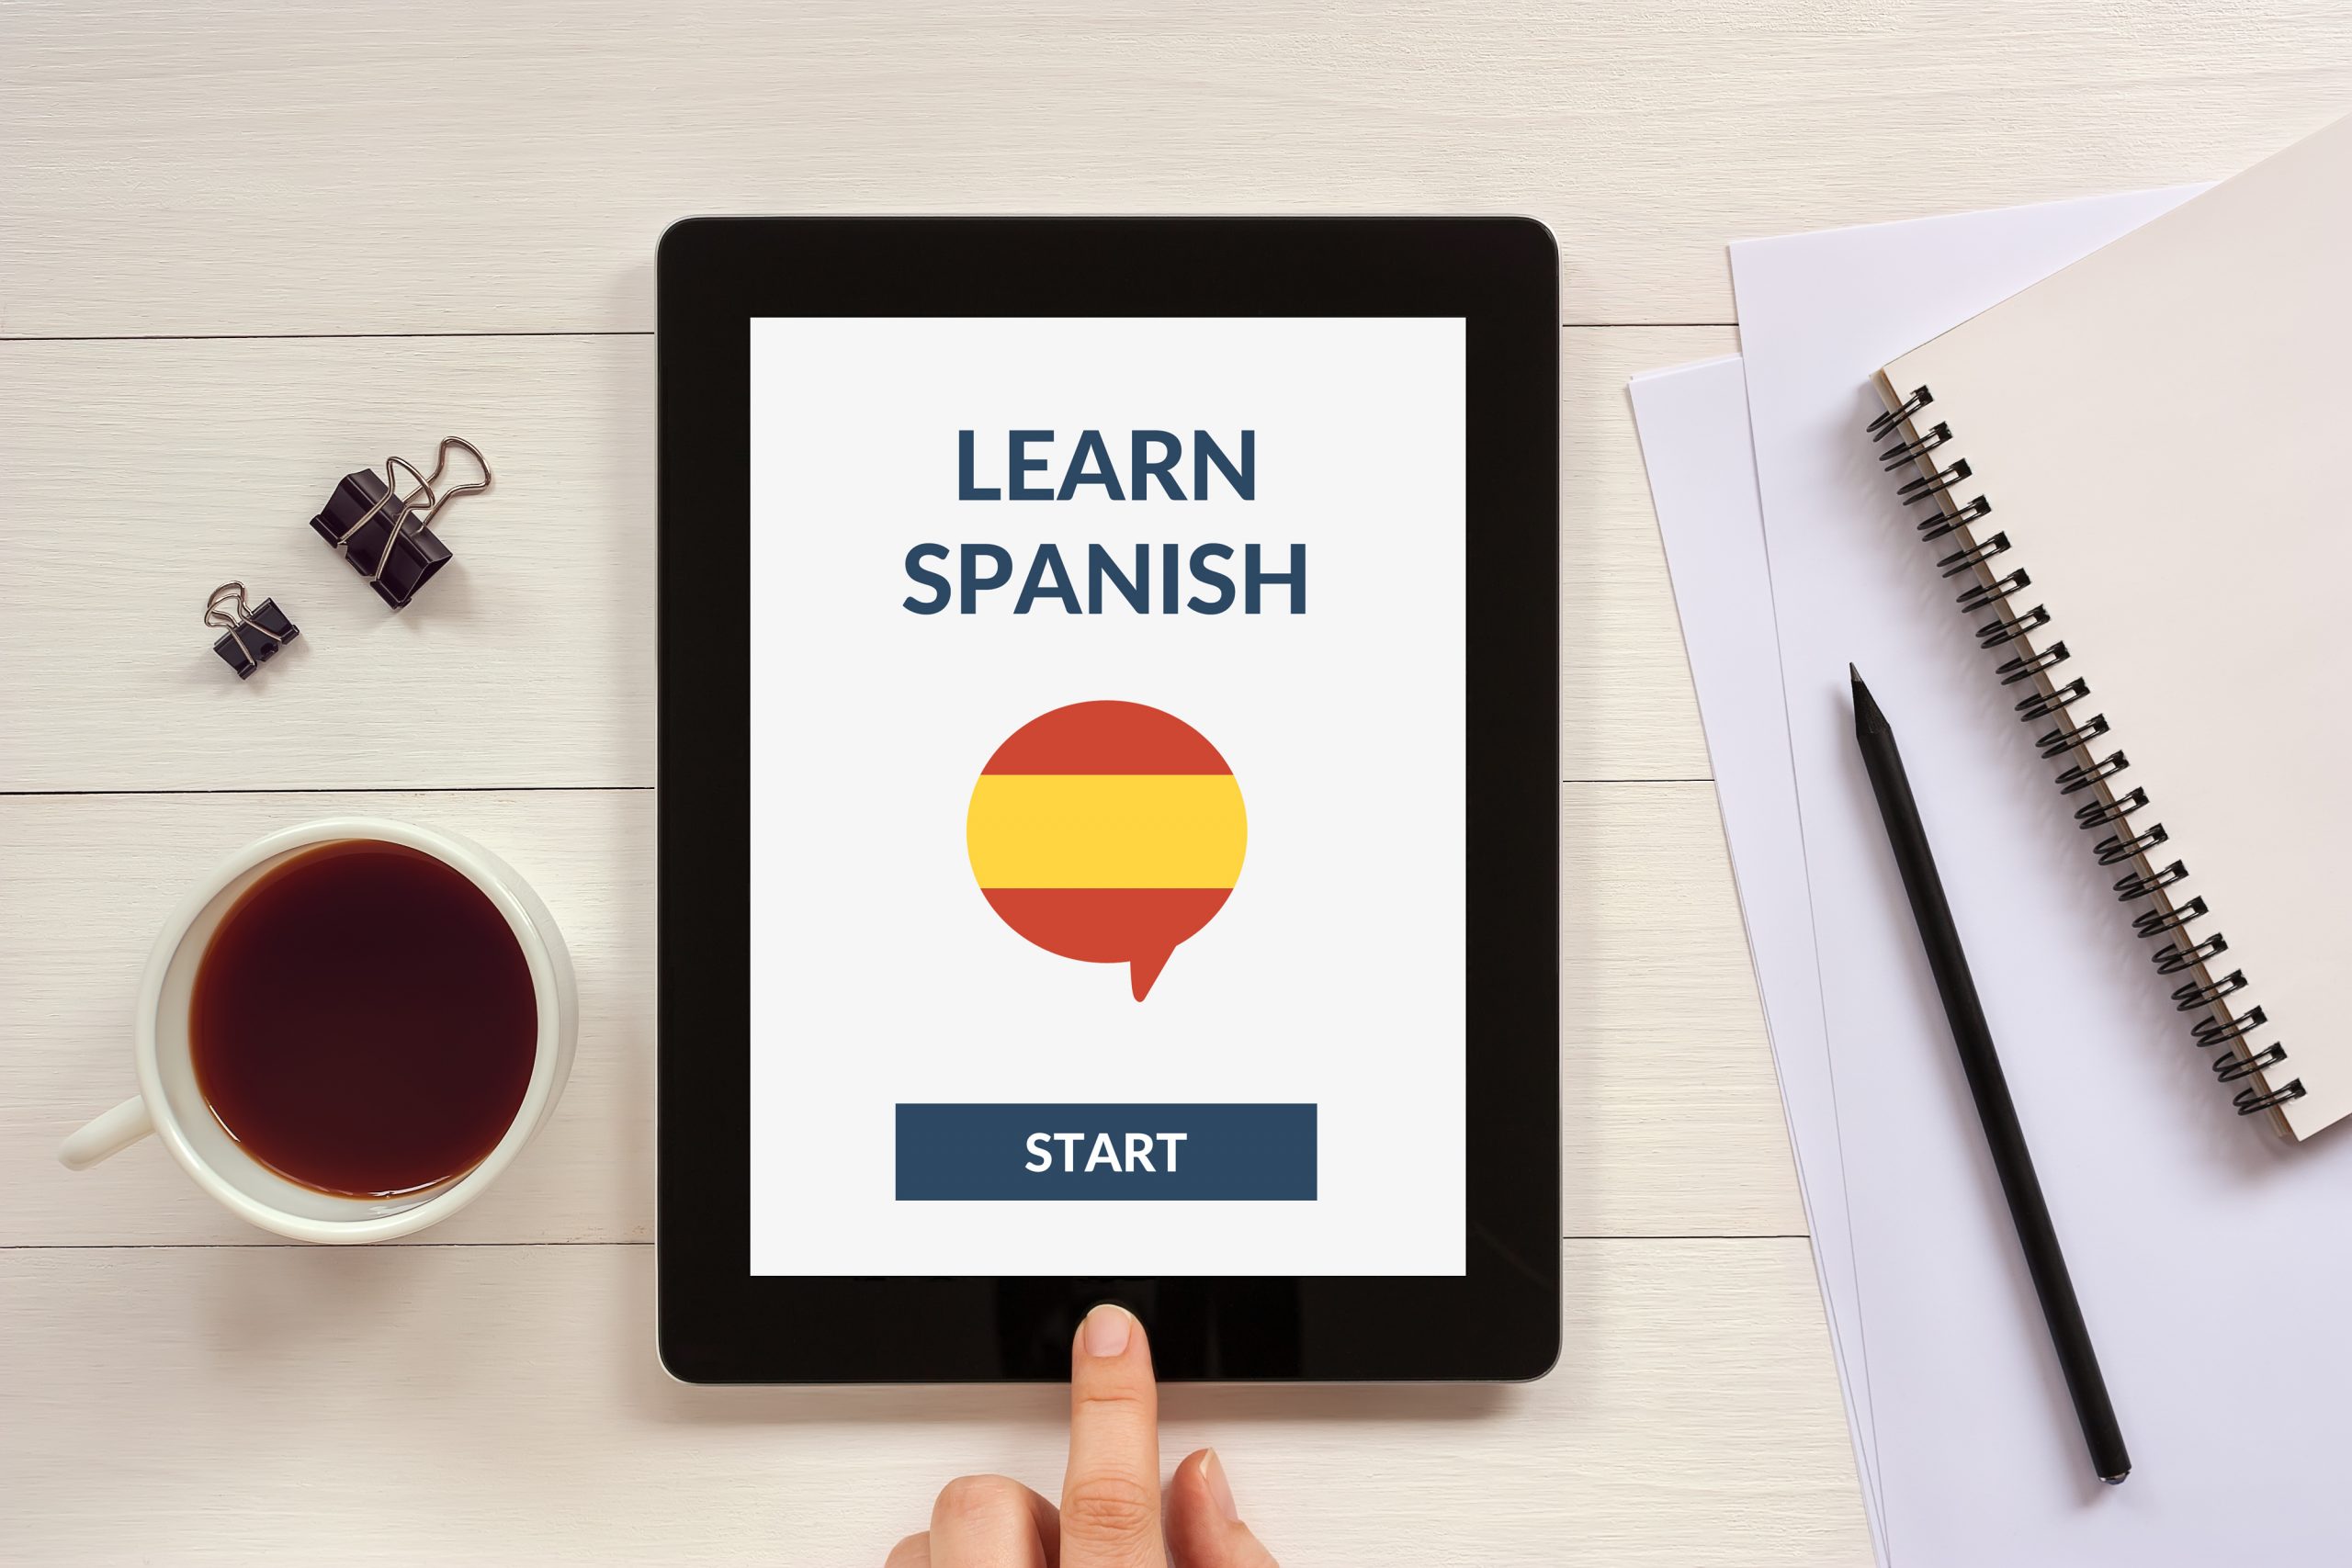 Online learn spanish concept on tablet screen with office objects. All screen content is designed by me